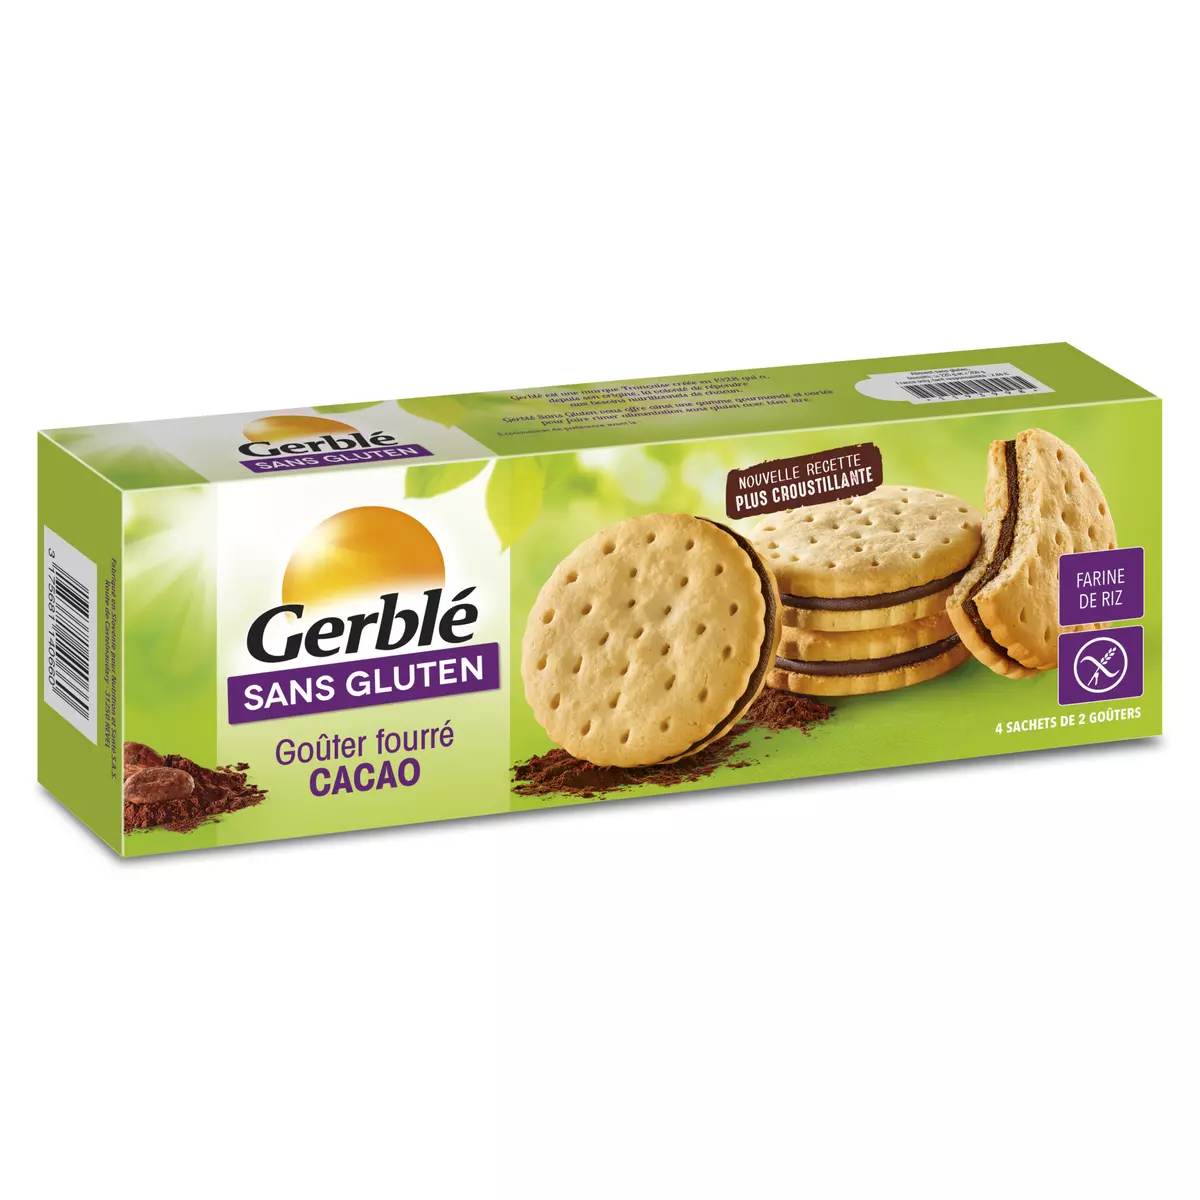 GERBLE Biscuits goûter fourré cacao sans gluten 8 biscuits 225g